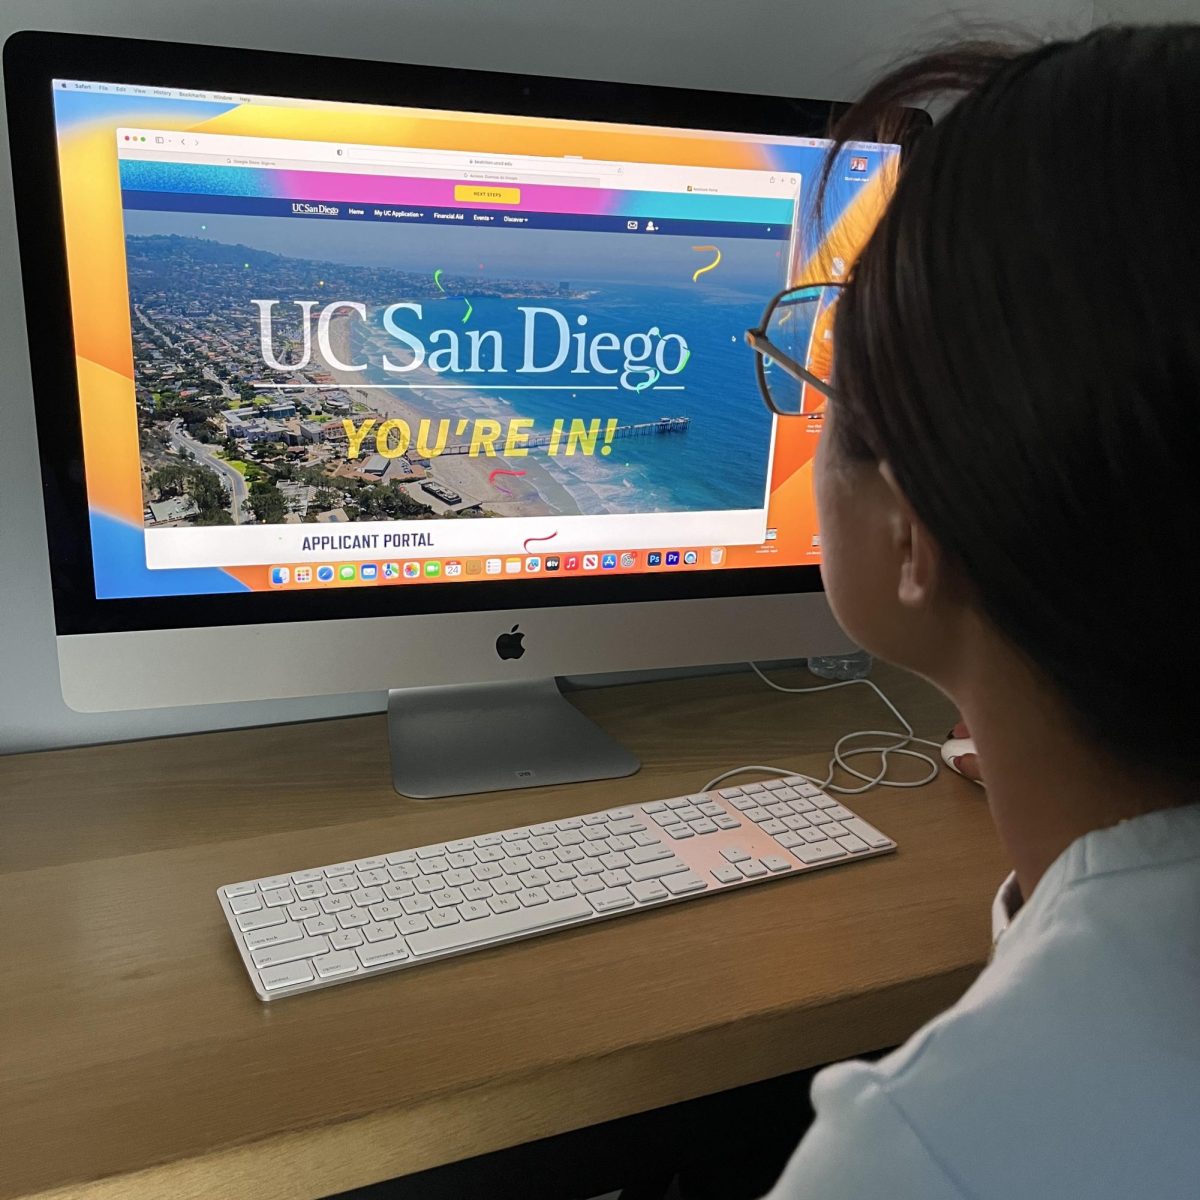 Andrea Salazar accidently opens her email on Apr. 20 to view her admission acceptance letter from University of California, San Diego.